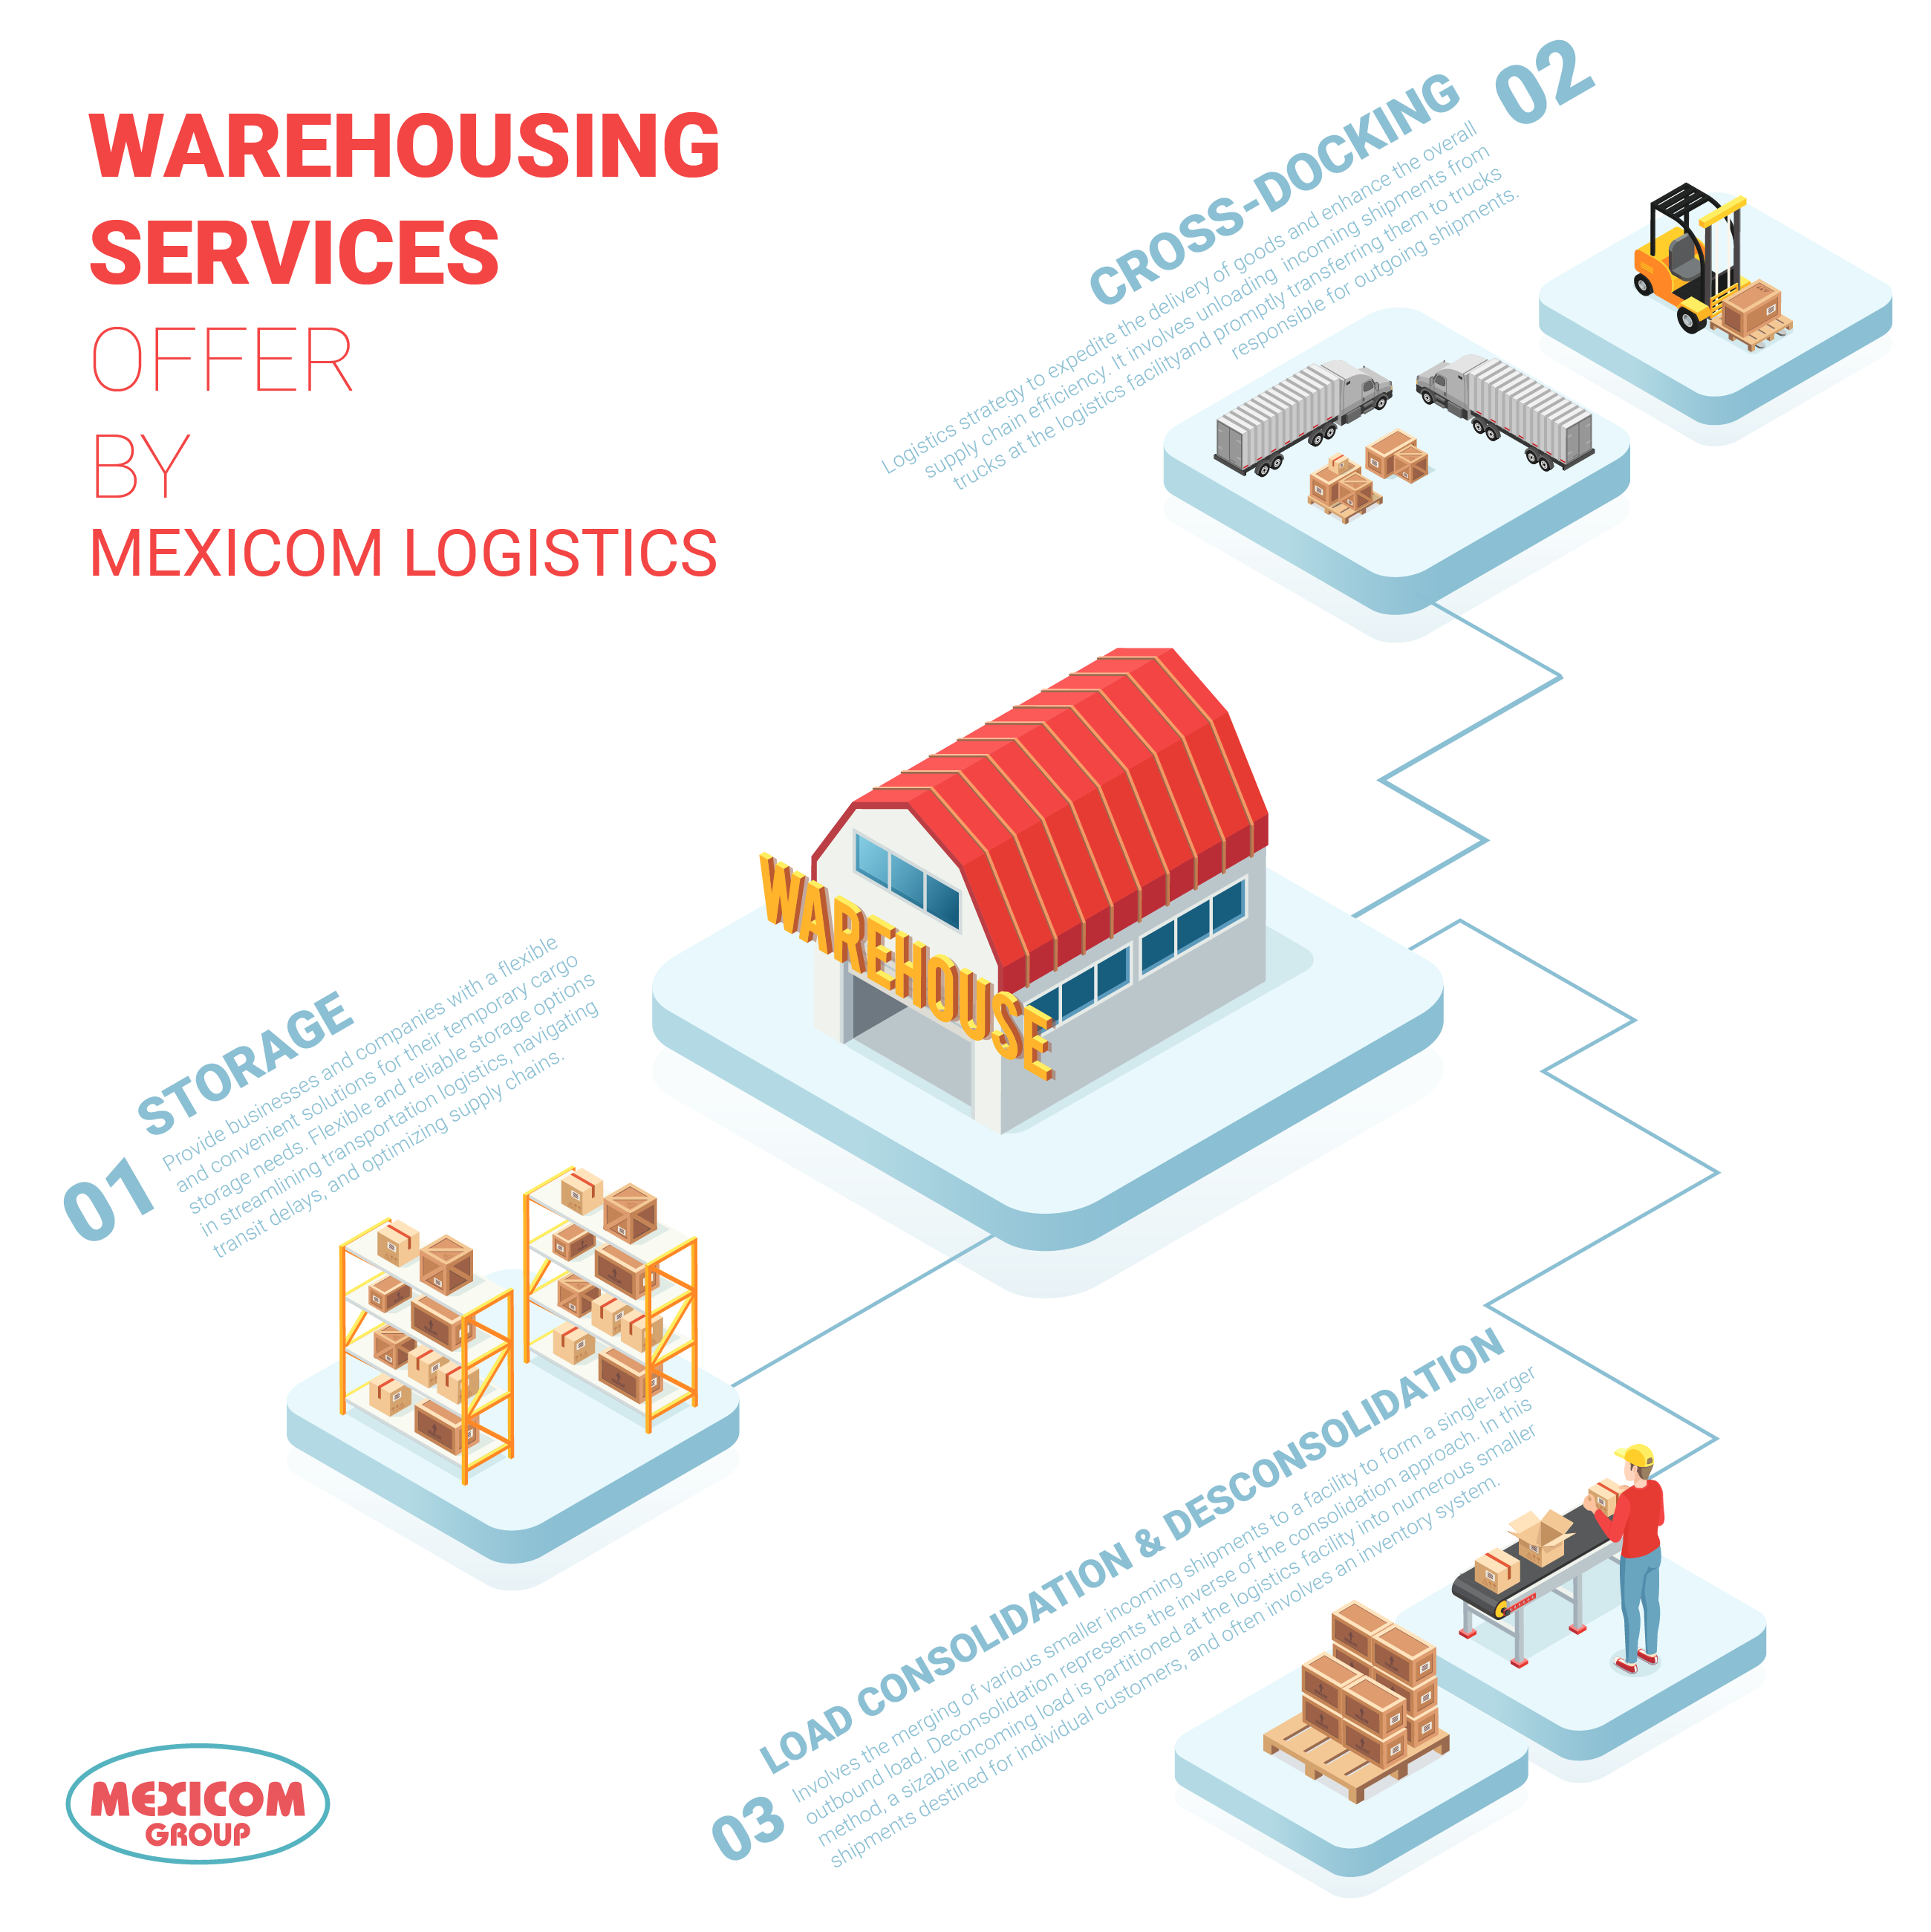 warehousing services offer by mexicom logistics